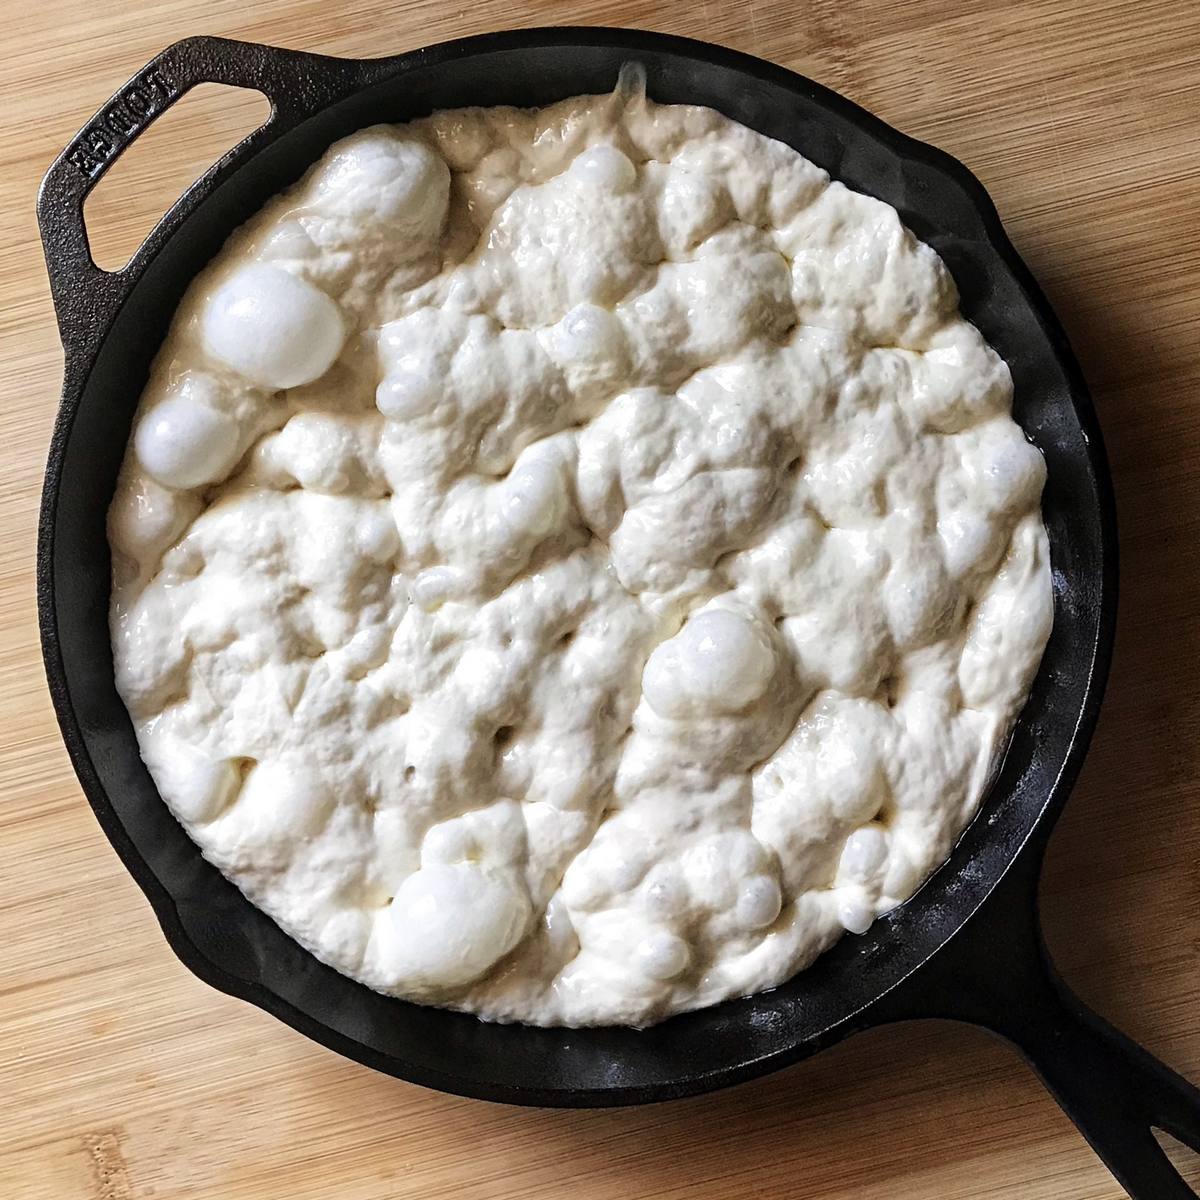 Dimpled focaccia dough in a cast iron pan.